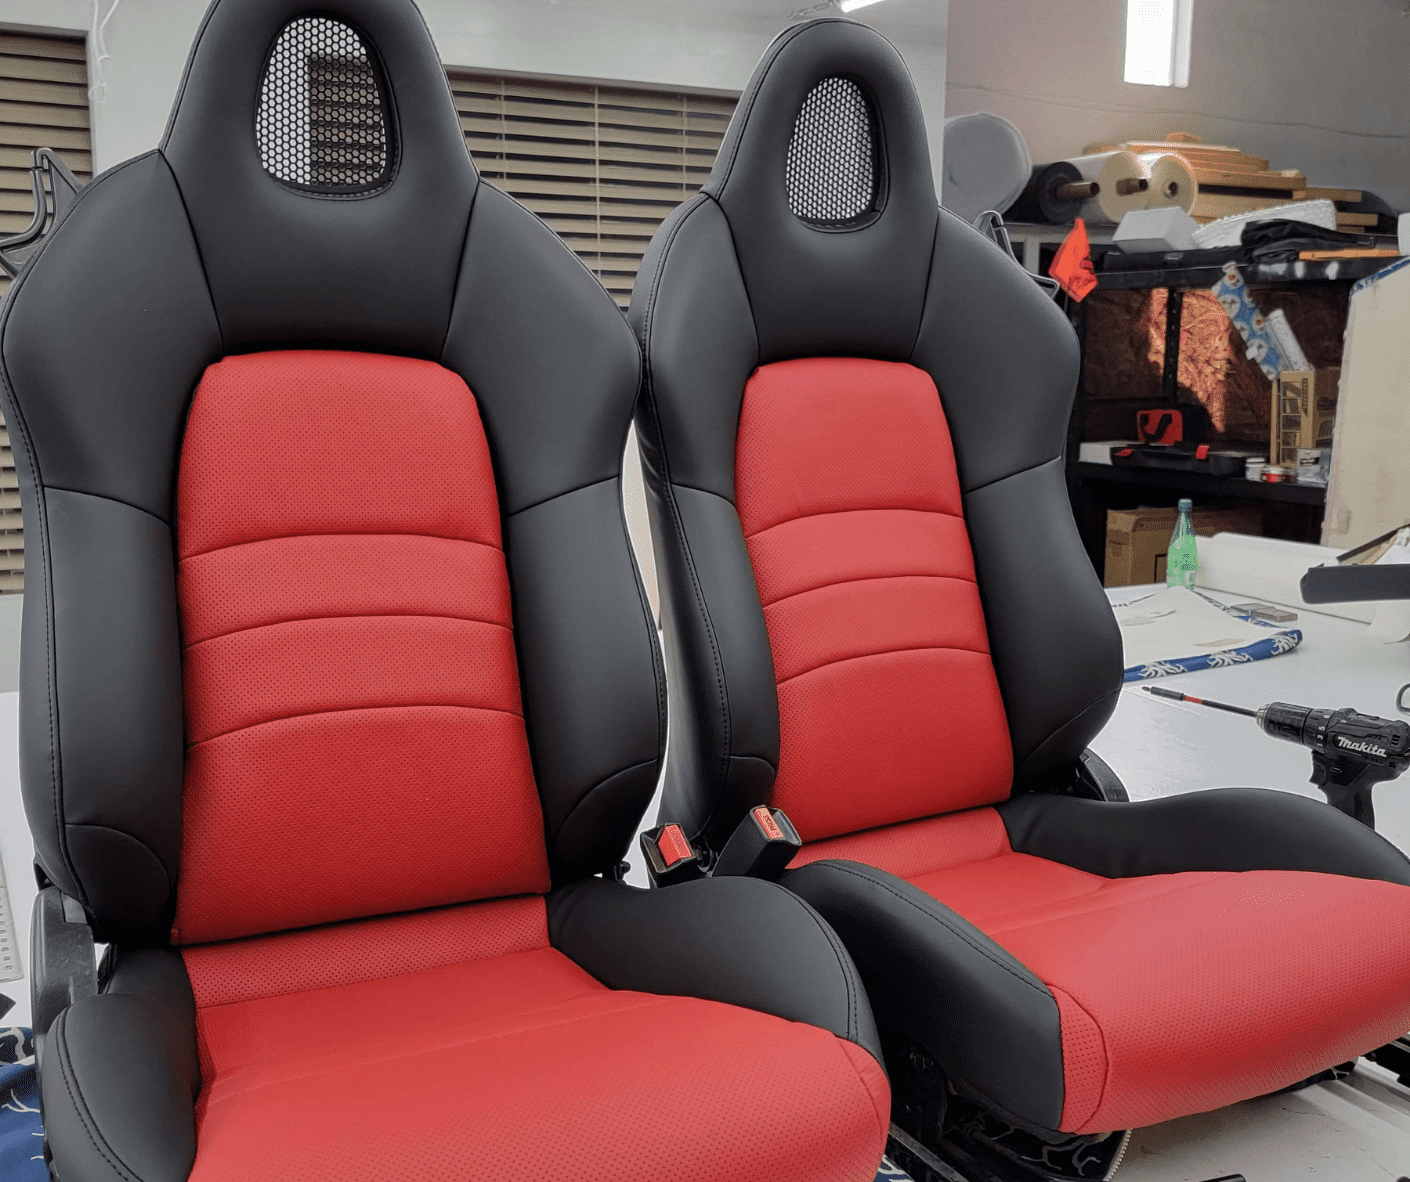 S200 Seat upholstery in black and red vinyl